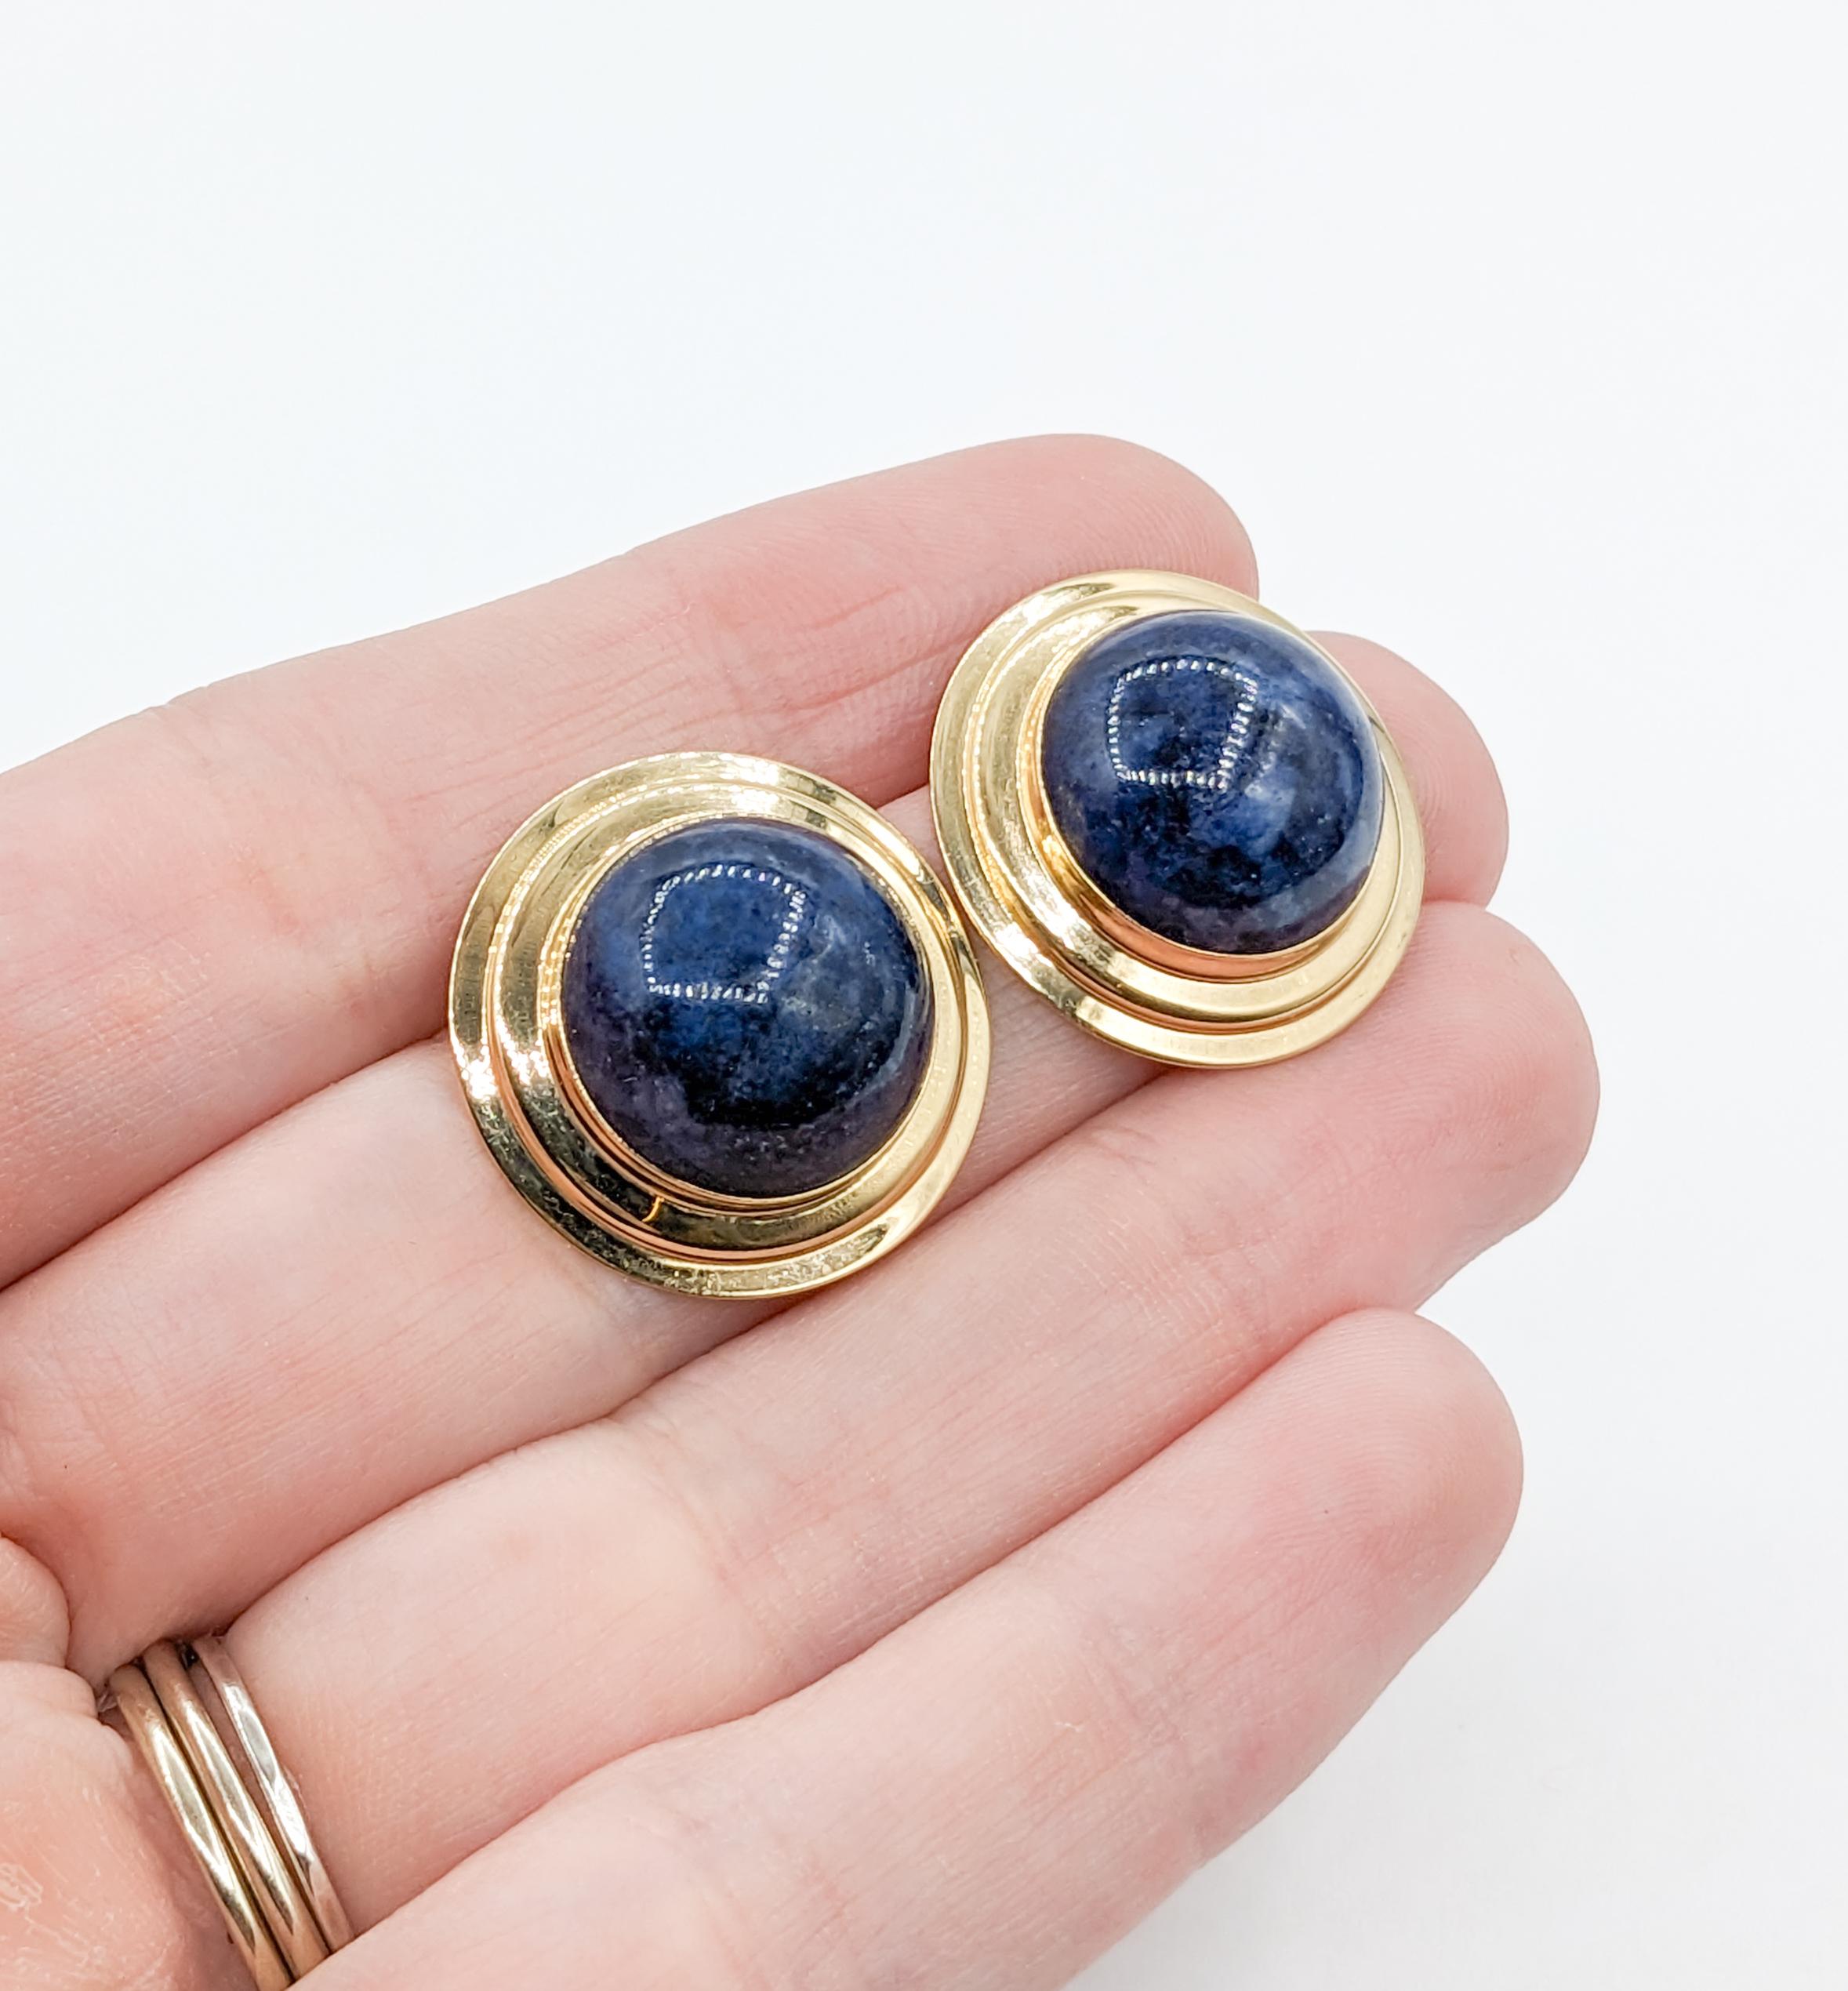 Statement Gold & Cabochon Lapis Clip On Earrings

Unveiling our elegant clip-on earrings, a blend of classic charm and modern finesse. Delicately crafted in 14k yellow gold, these earrings are adorned with a 15mm cabochon Lapis centerpiece. The